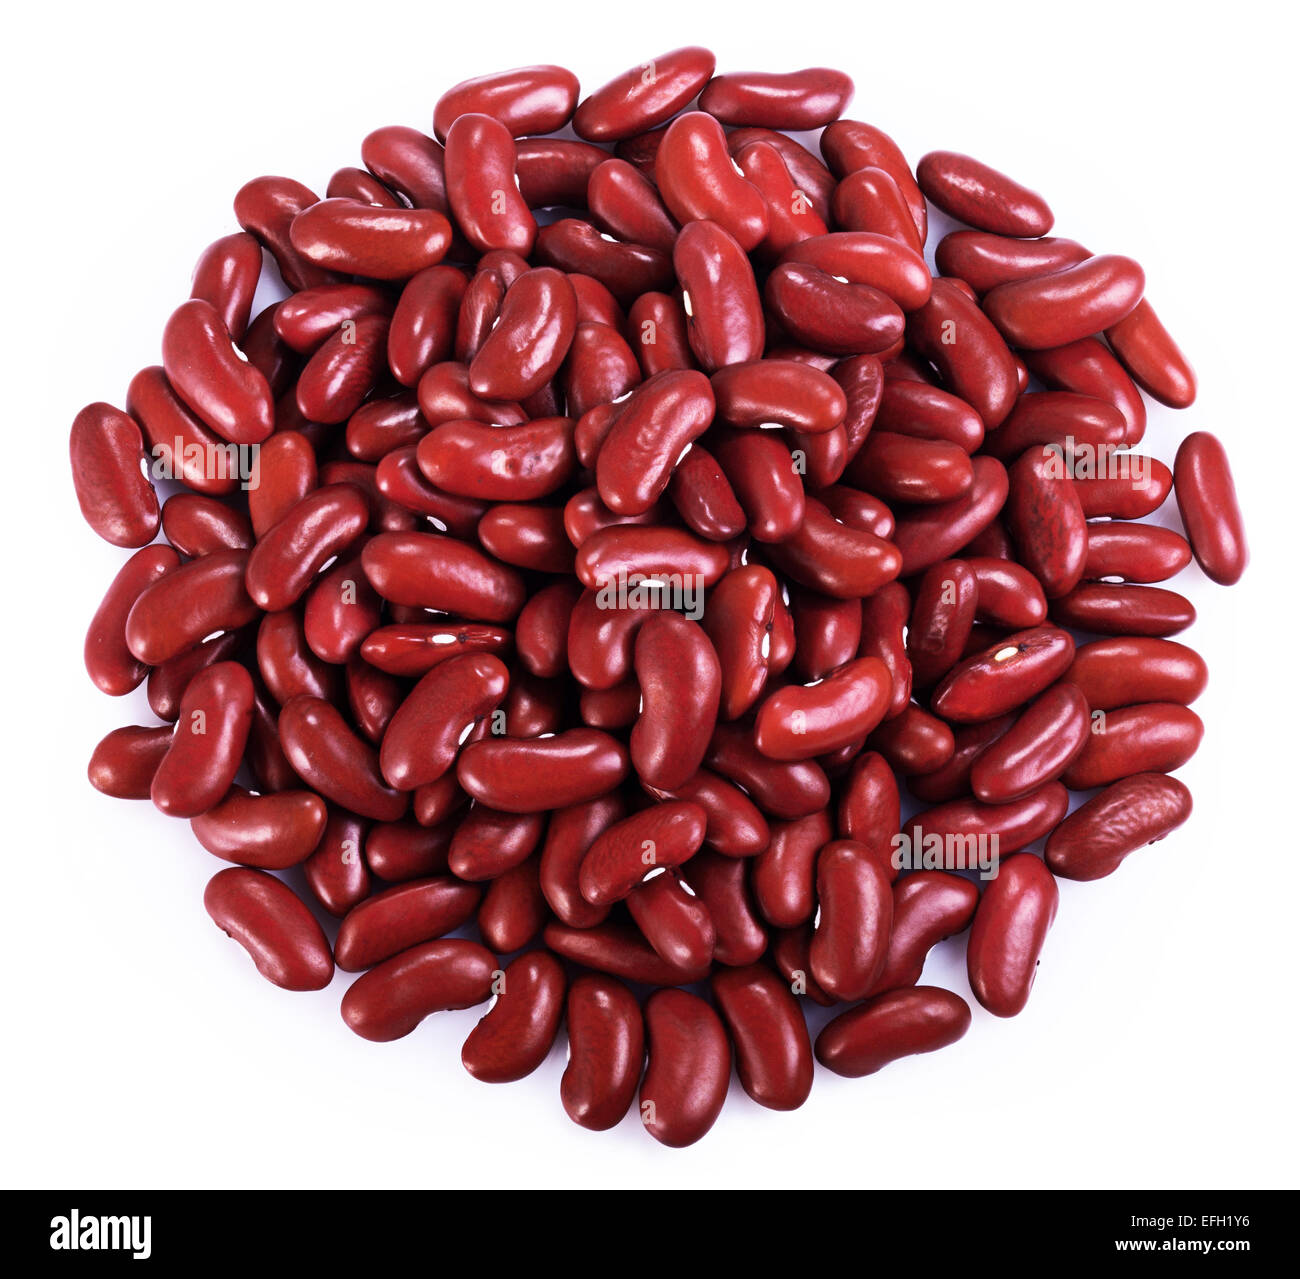 Red kidney beans on a white background Stock Photo